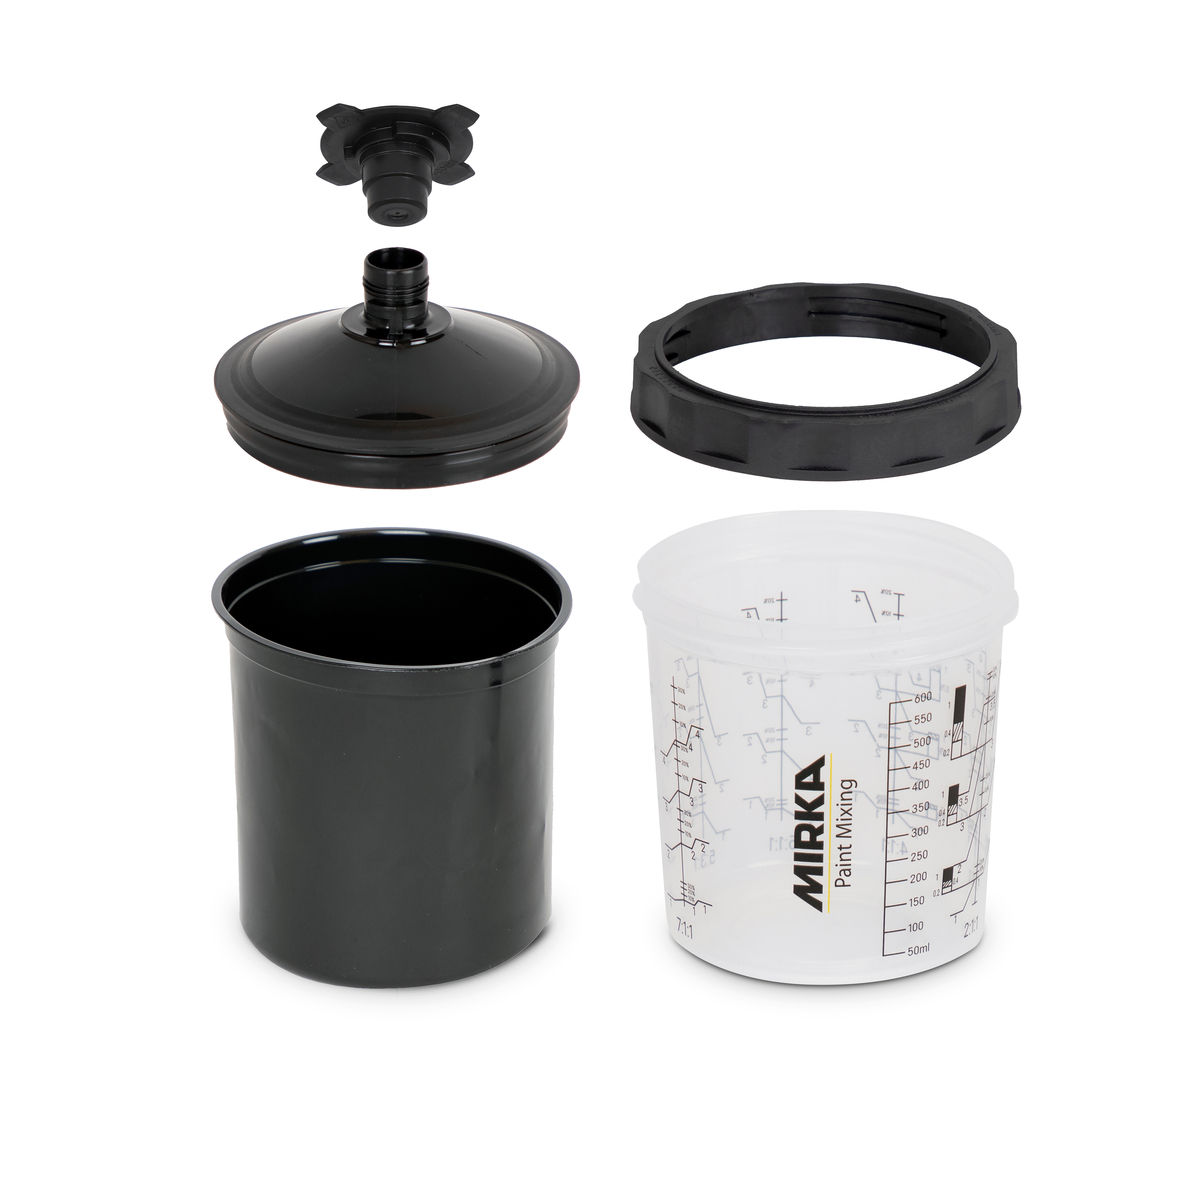 UV resistant Paint Cup System with 125µm filter lid